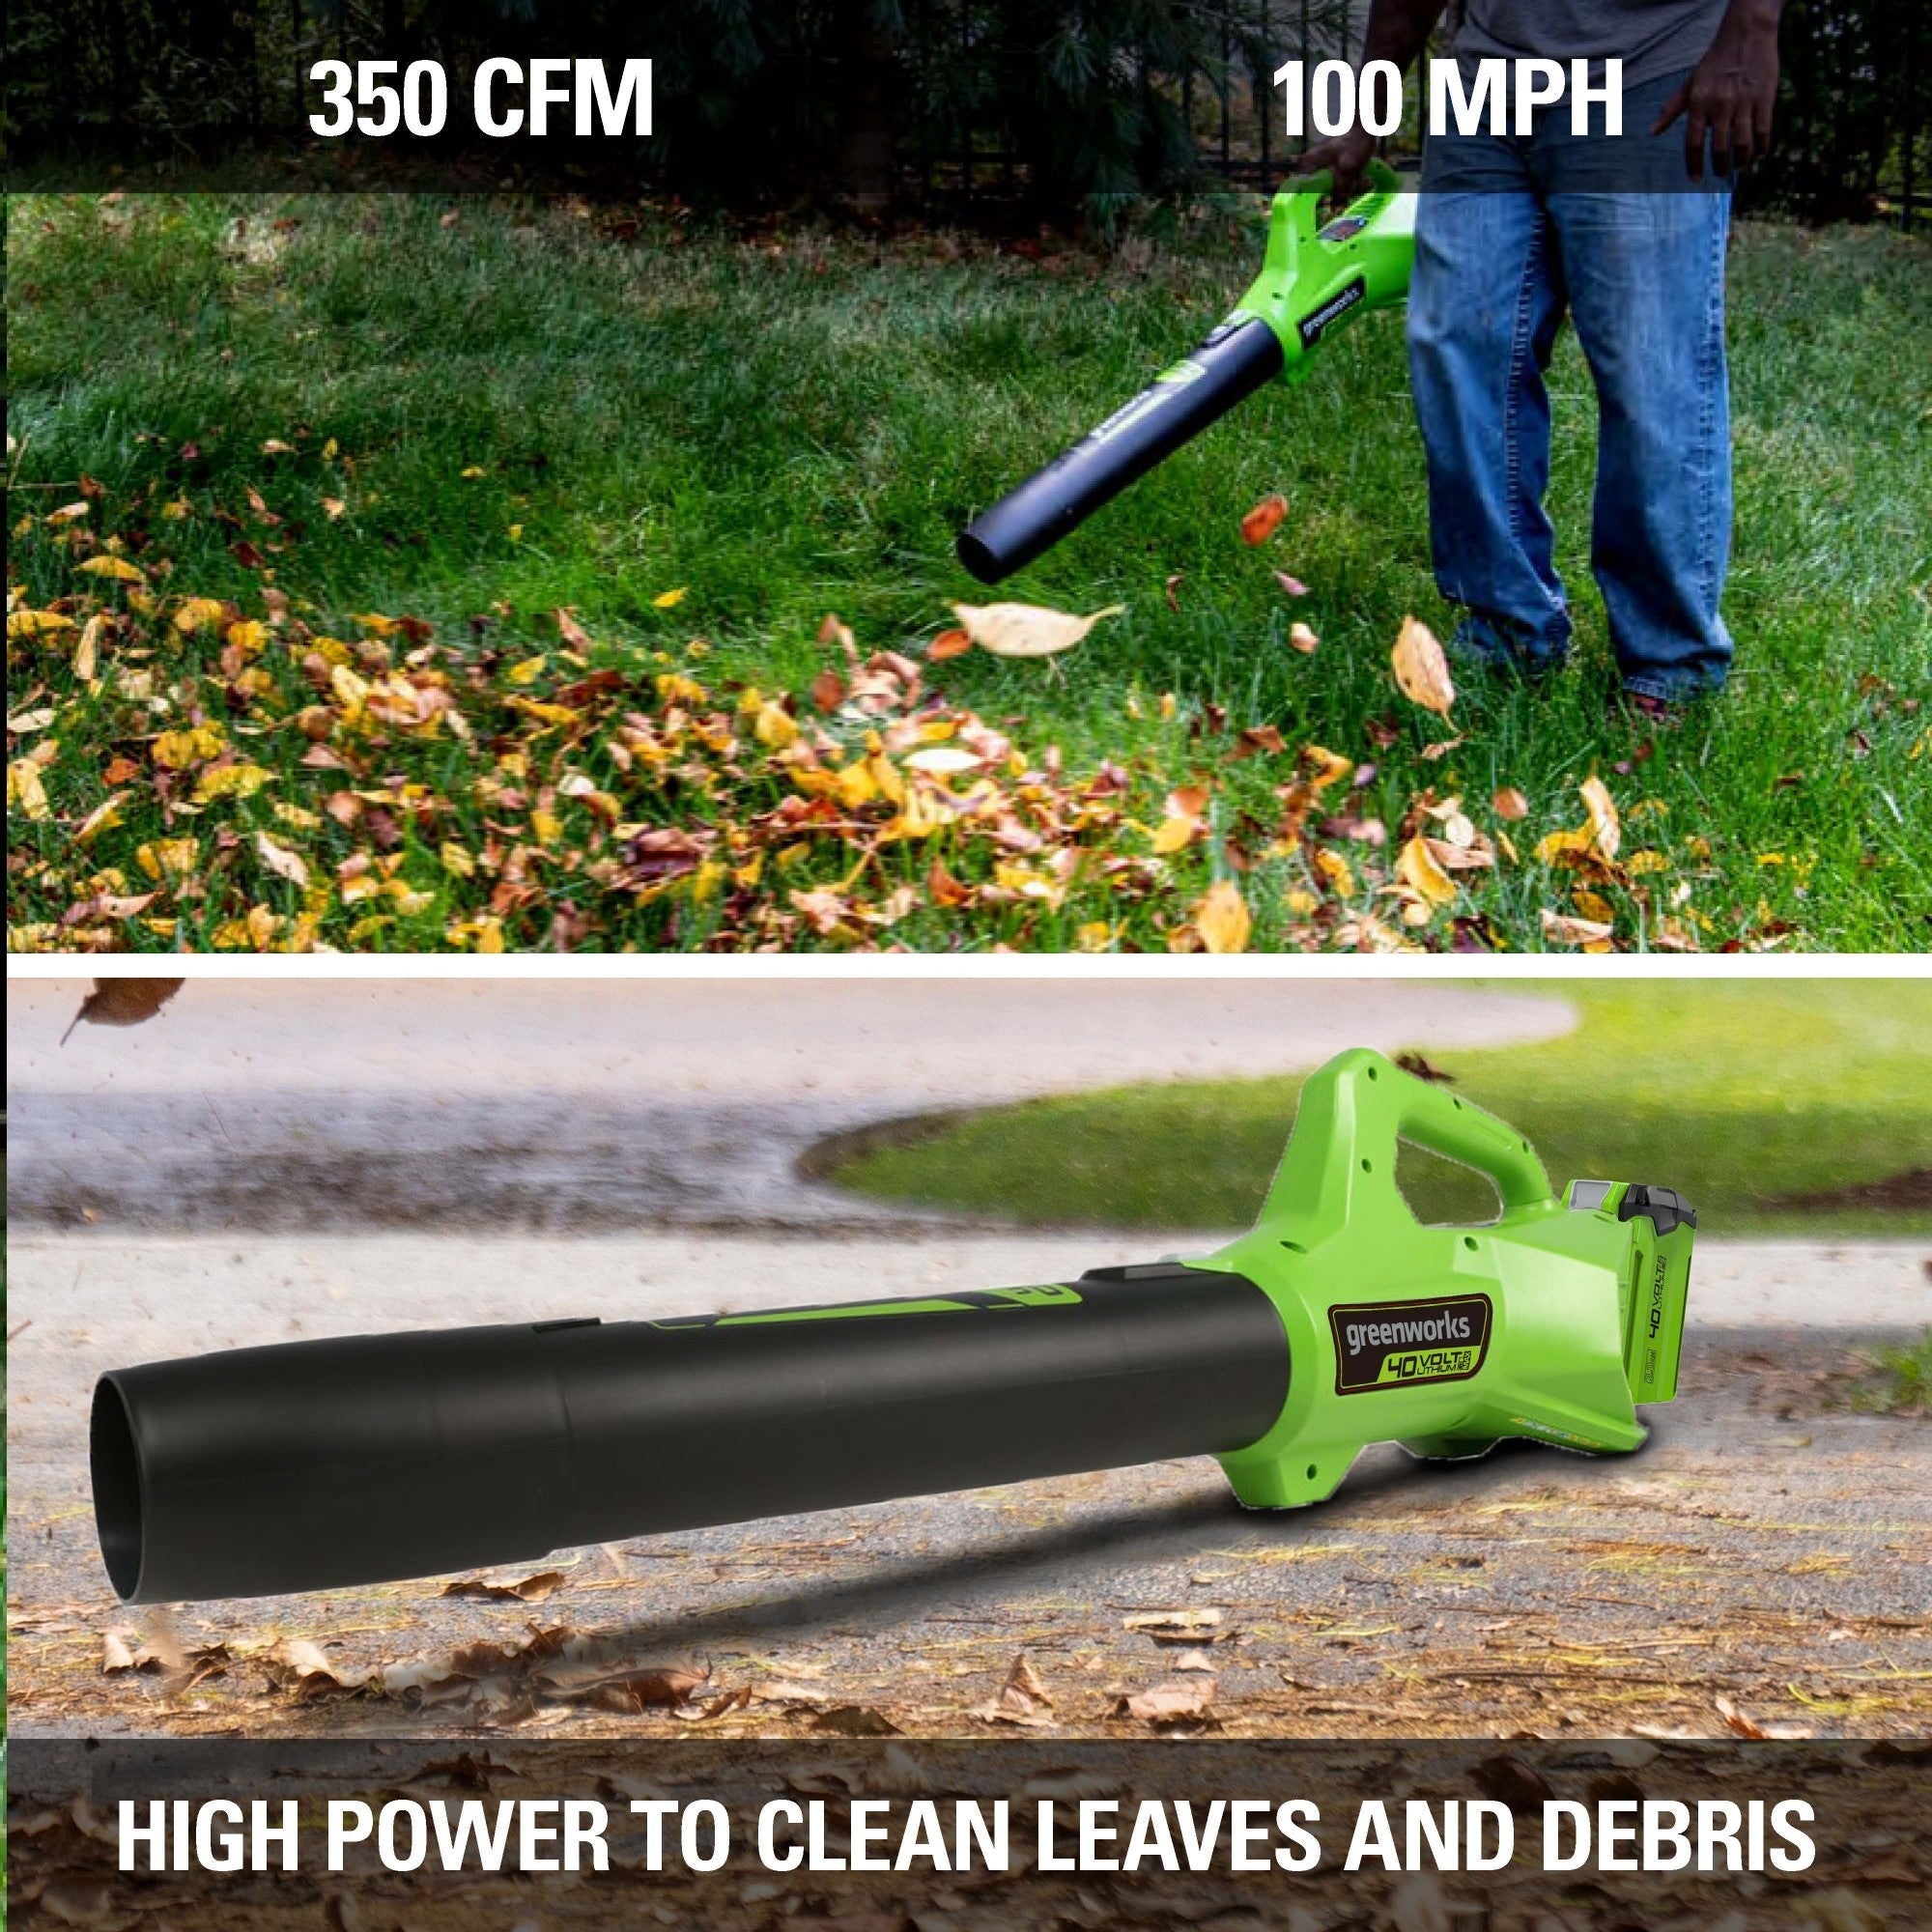 40V 21" Cordless Battery Self-Propelled Lawn Mower, 13" String Trimmer & 350 CFM Leaf Blowerw/ (1)5.0Ah Battery,(1)2.0Ah Battery & (2)Chargers